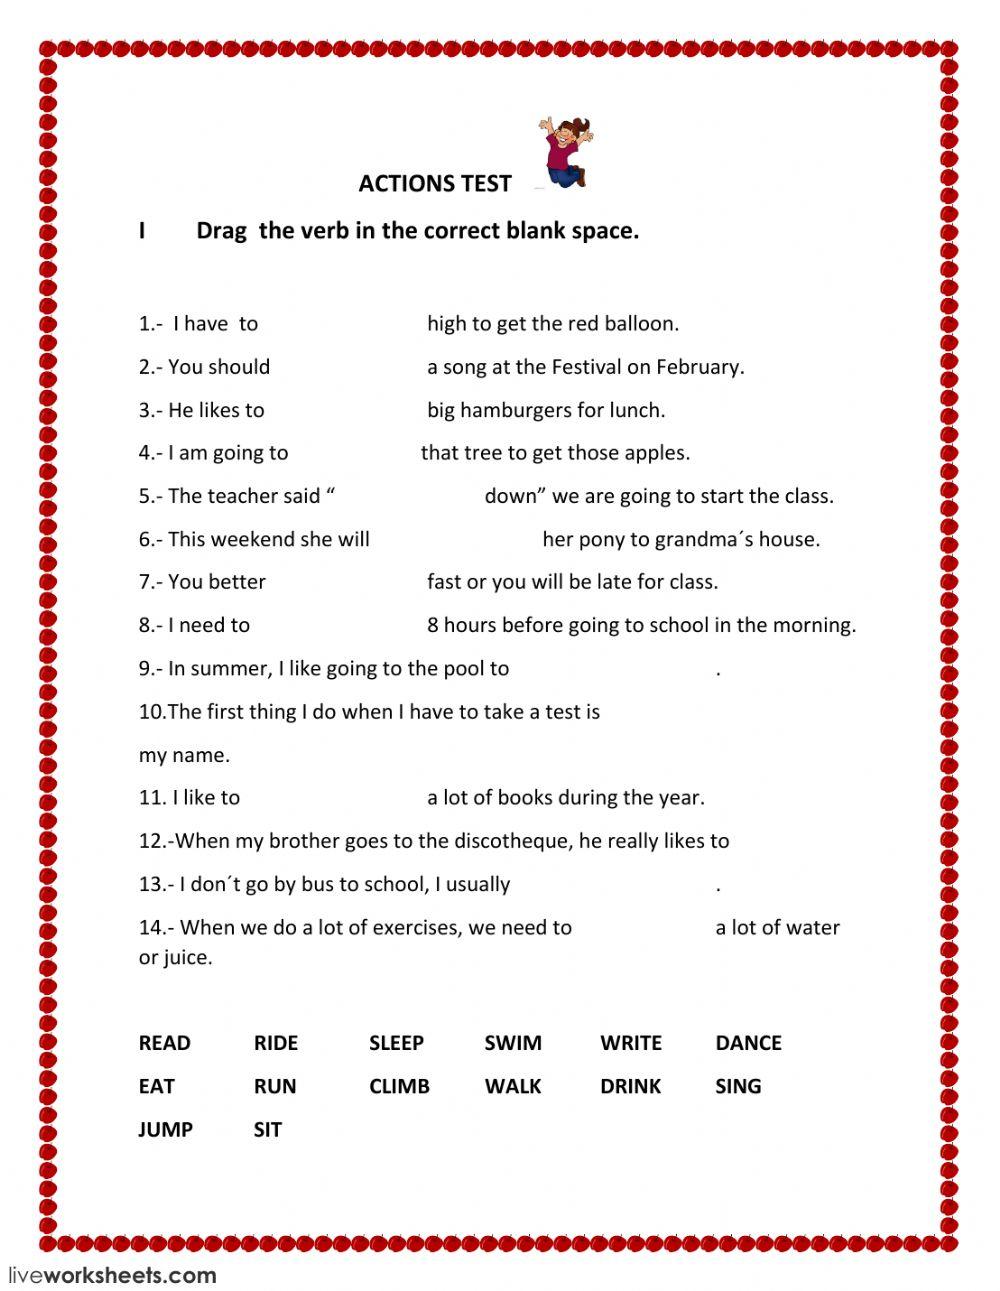 ACTIONS TEST